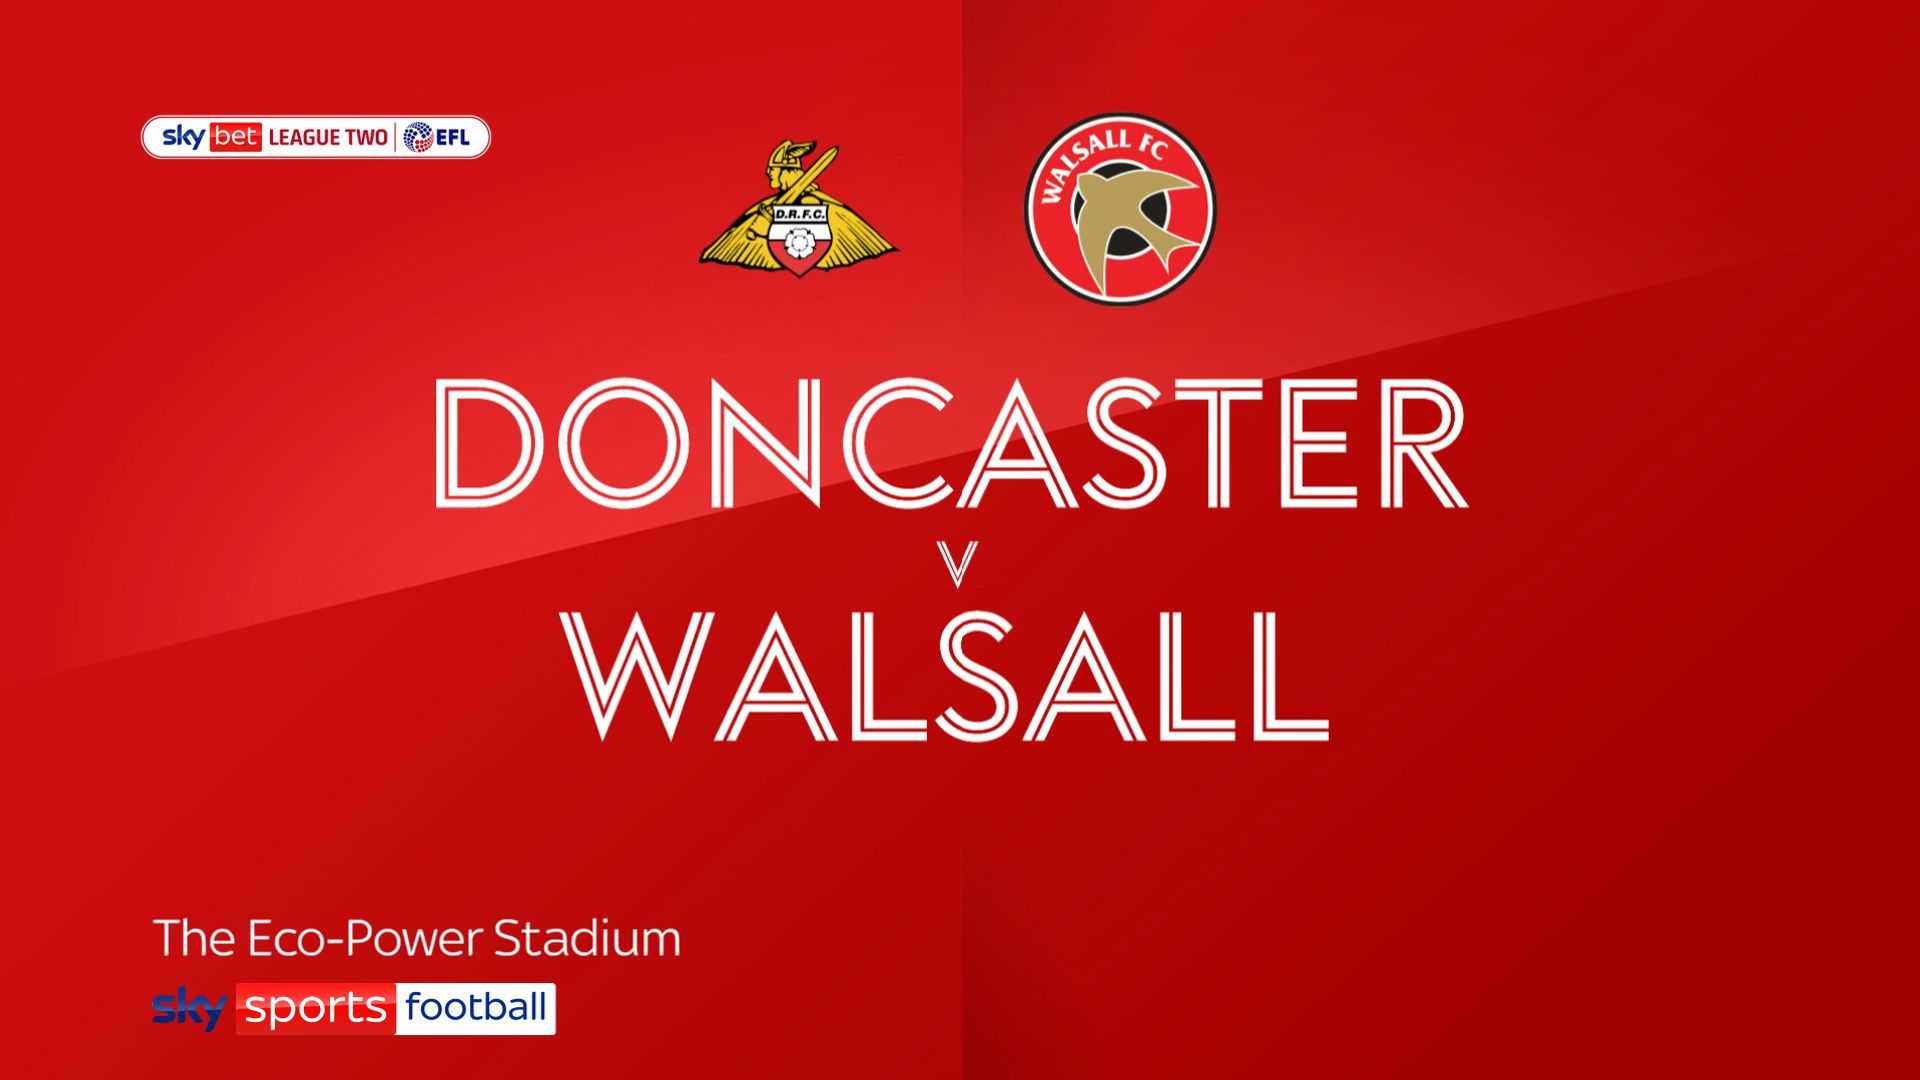 Doncaster 0-2 Walsall: Tom Knowles and Danny Johnson seal win